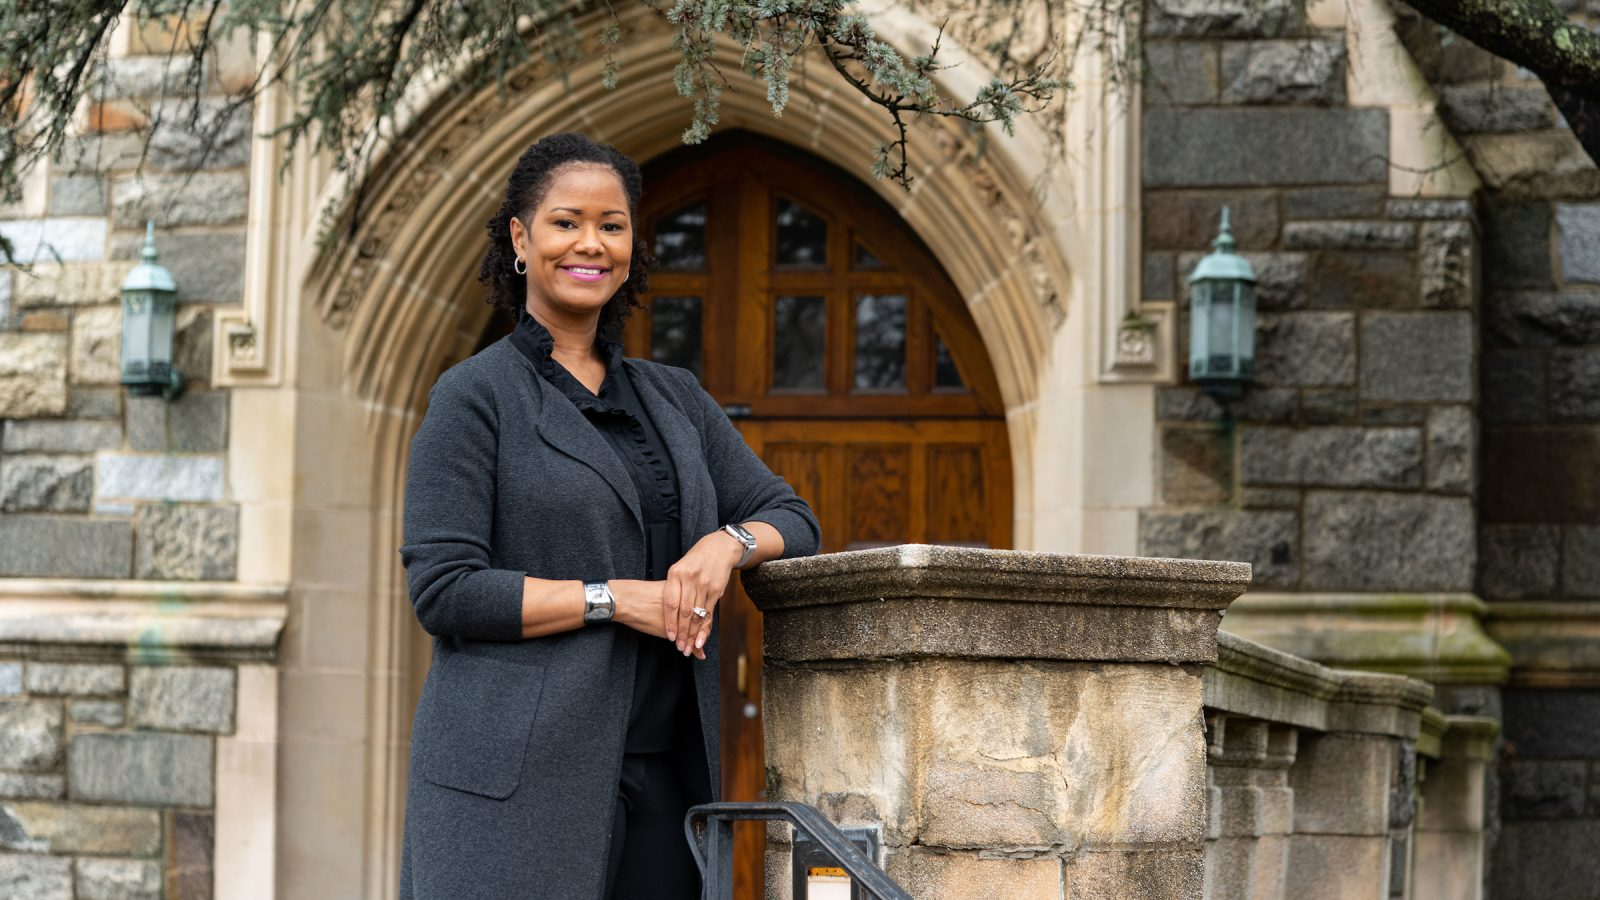 Soyica Diggs Colbert stands in front of a stone building